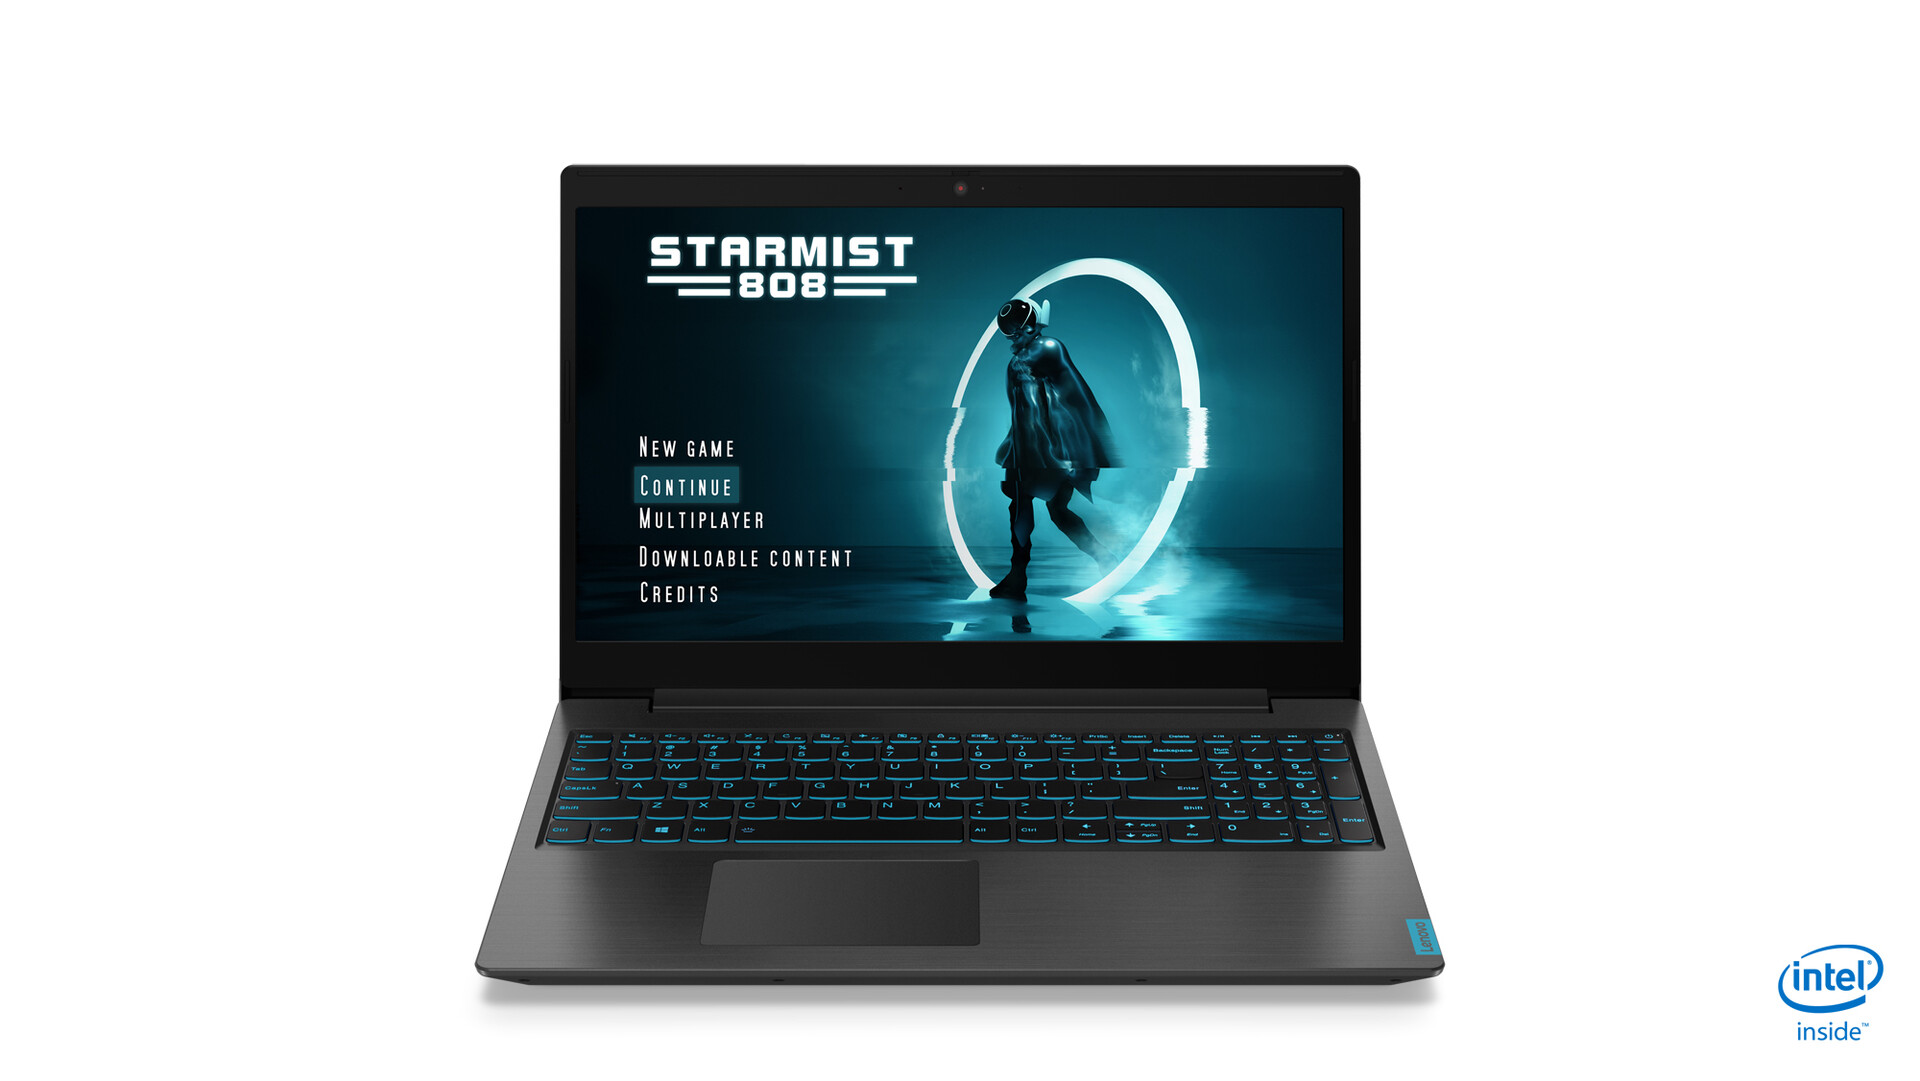 Budget-friendly IdeaPad L340 coming with GTX 1650 graphics for NotebookCheck.net